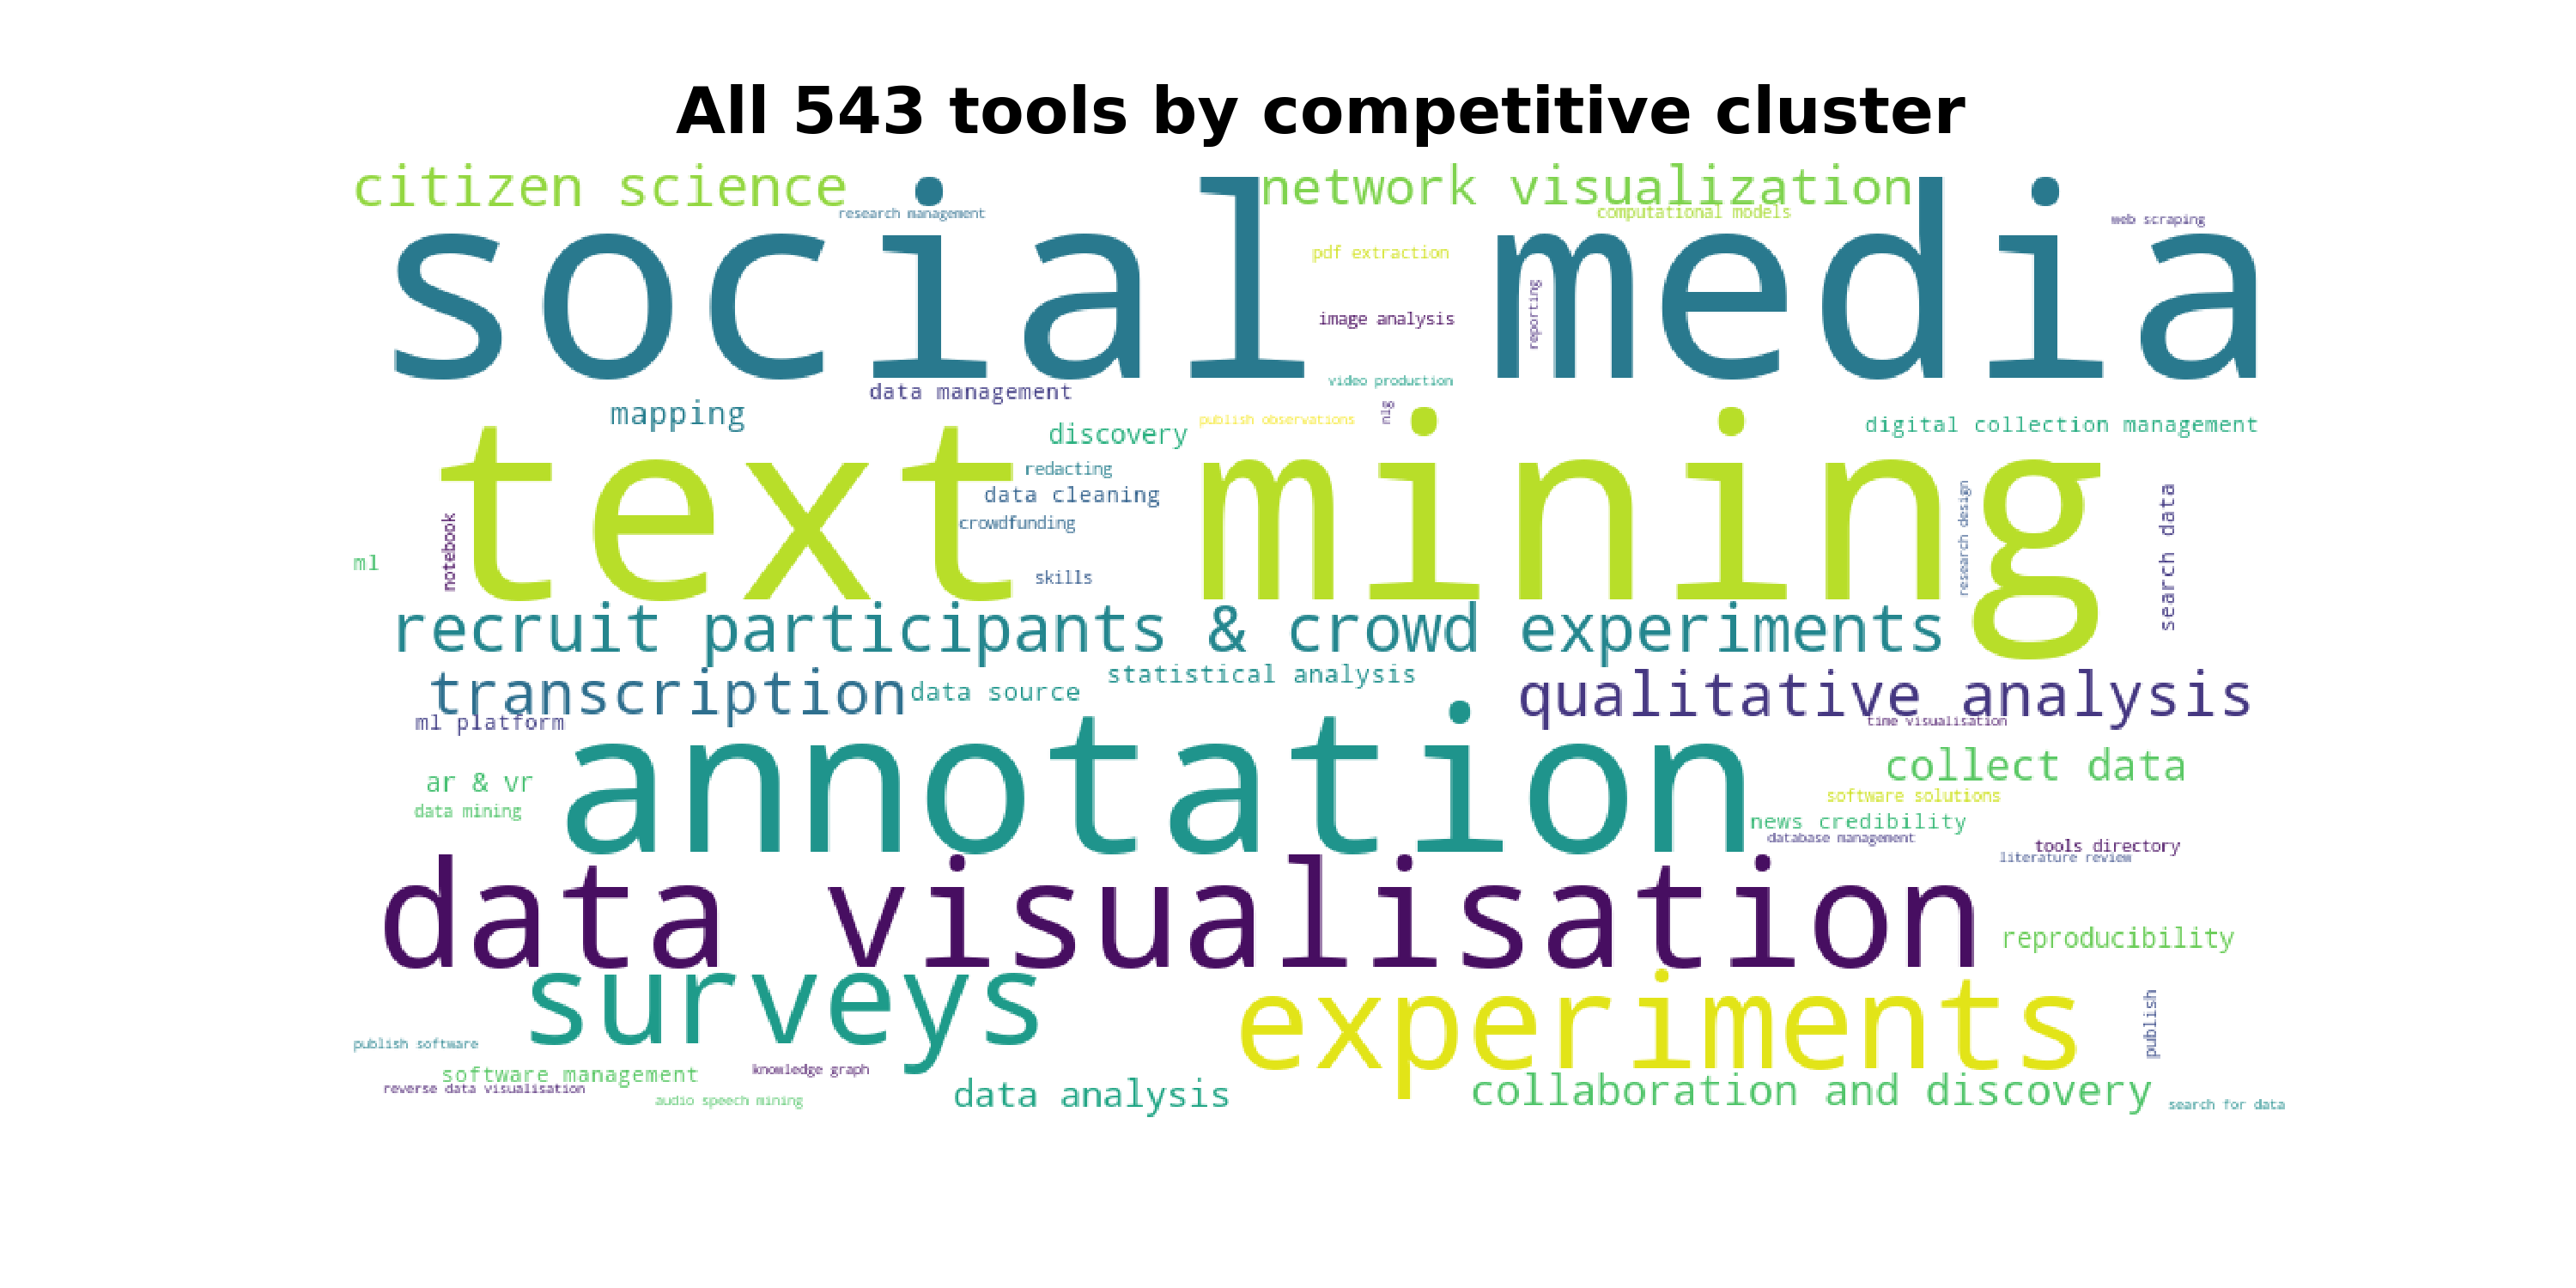 Tools by competitive cluster